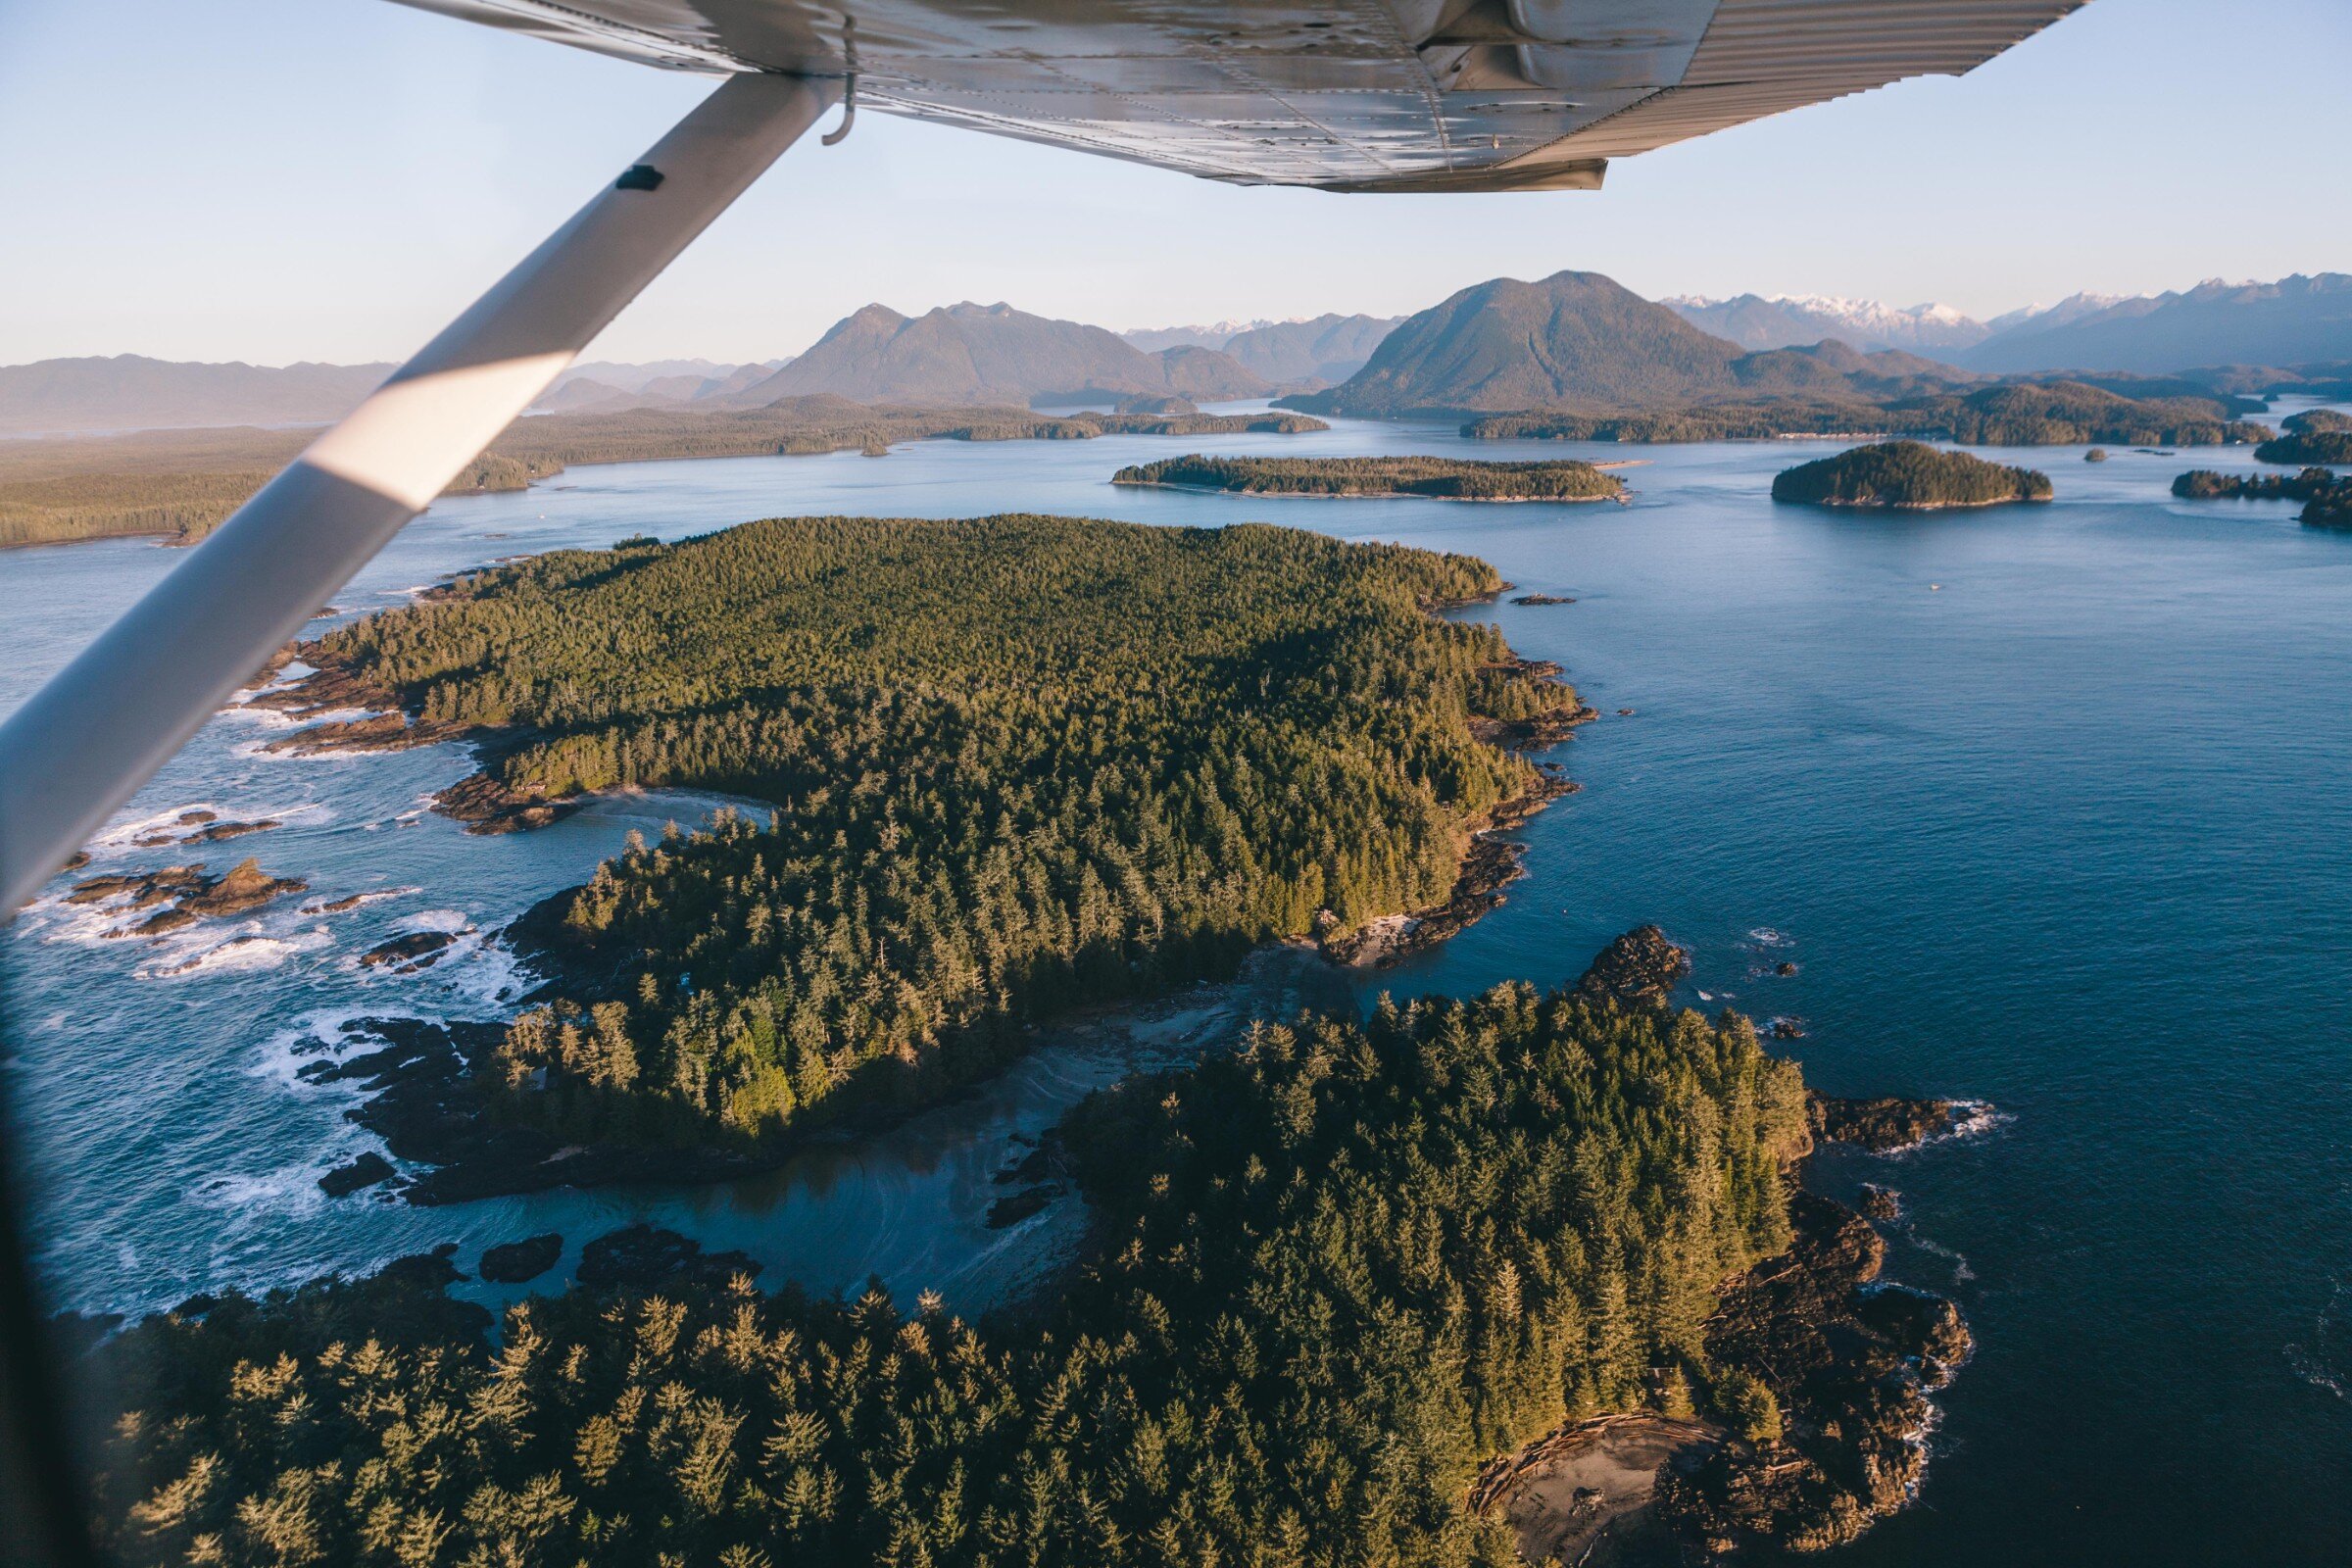 View from a floatplane looking at islands and ocean below